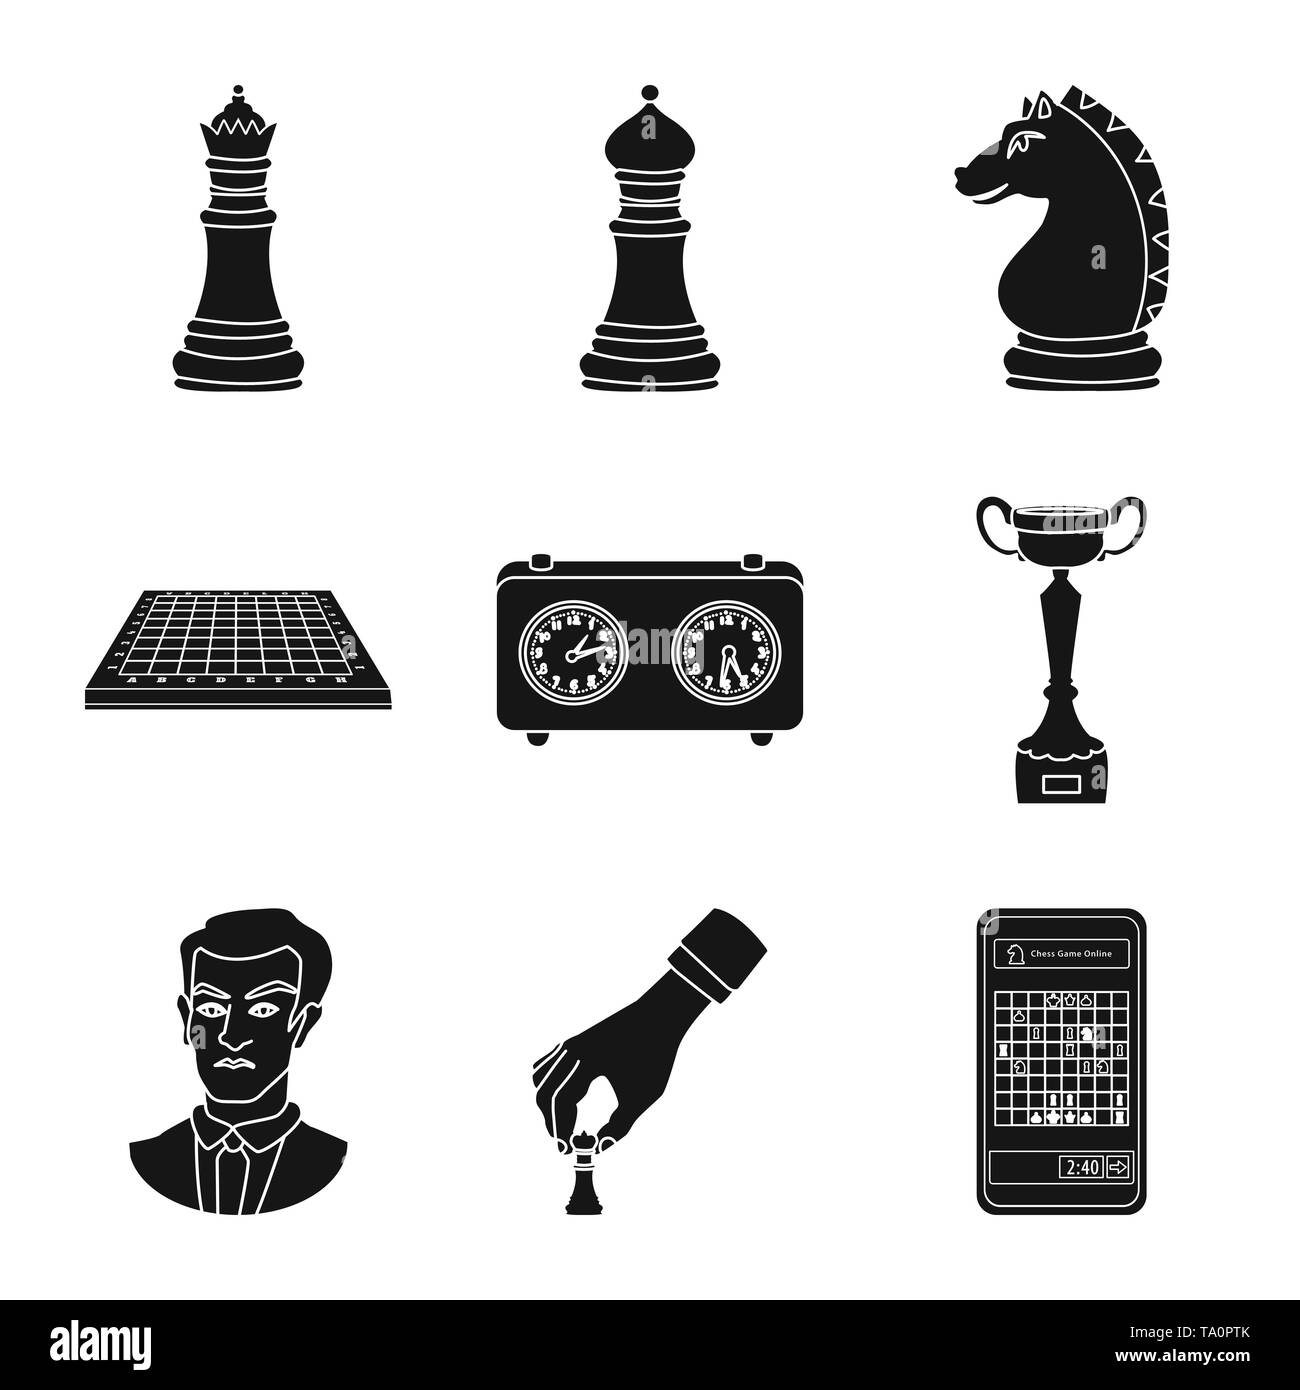 queen,bishop,knight,chessboard,clock,cup,man,hand,mobile,board,strategic,horse,timer,winner,businessman,king,app,white,championship,checkerboard,speed,trophy,profile,concept,phone, mate,empty,bowl,club,target,chess,game,piece,strategy,tactical,play ...